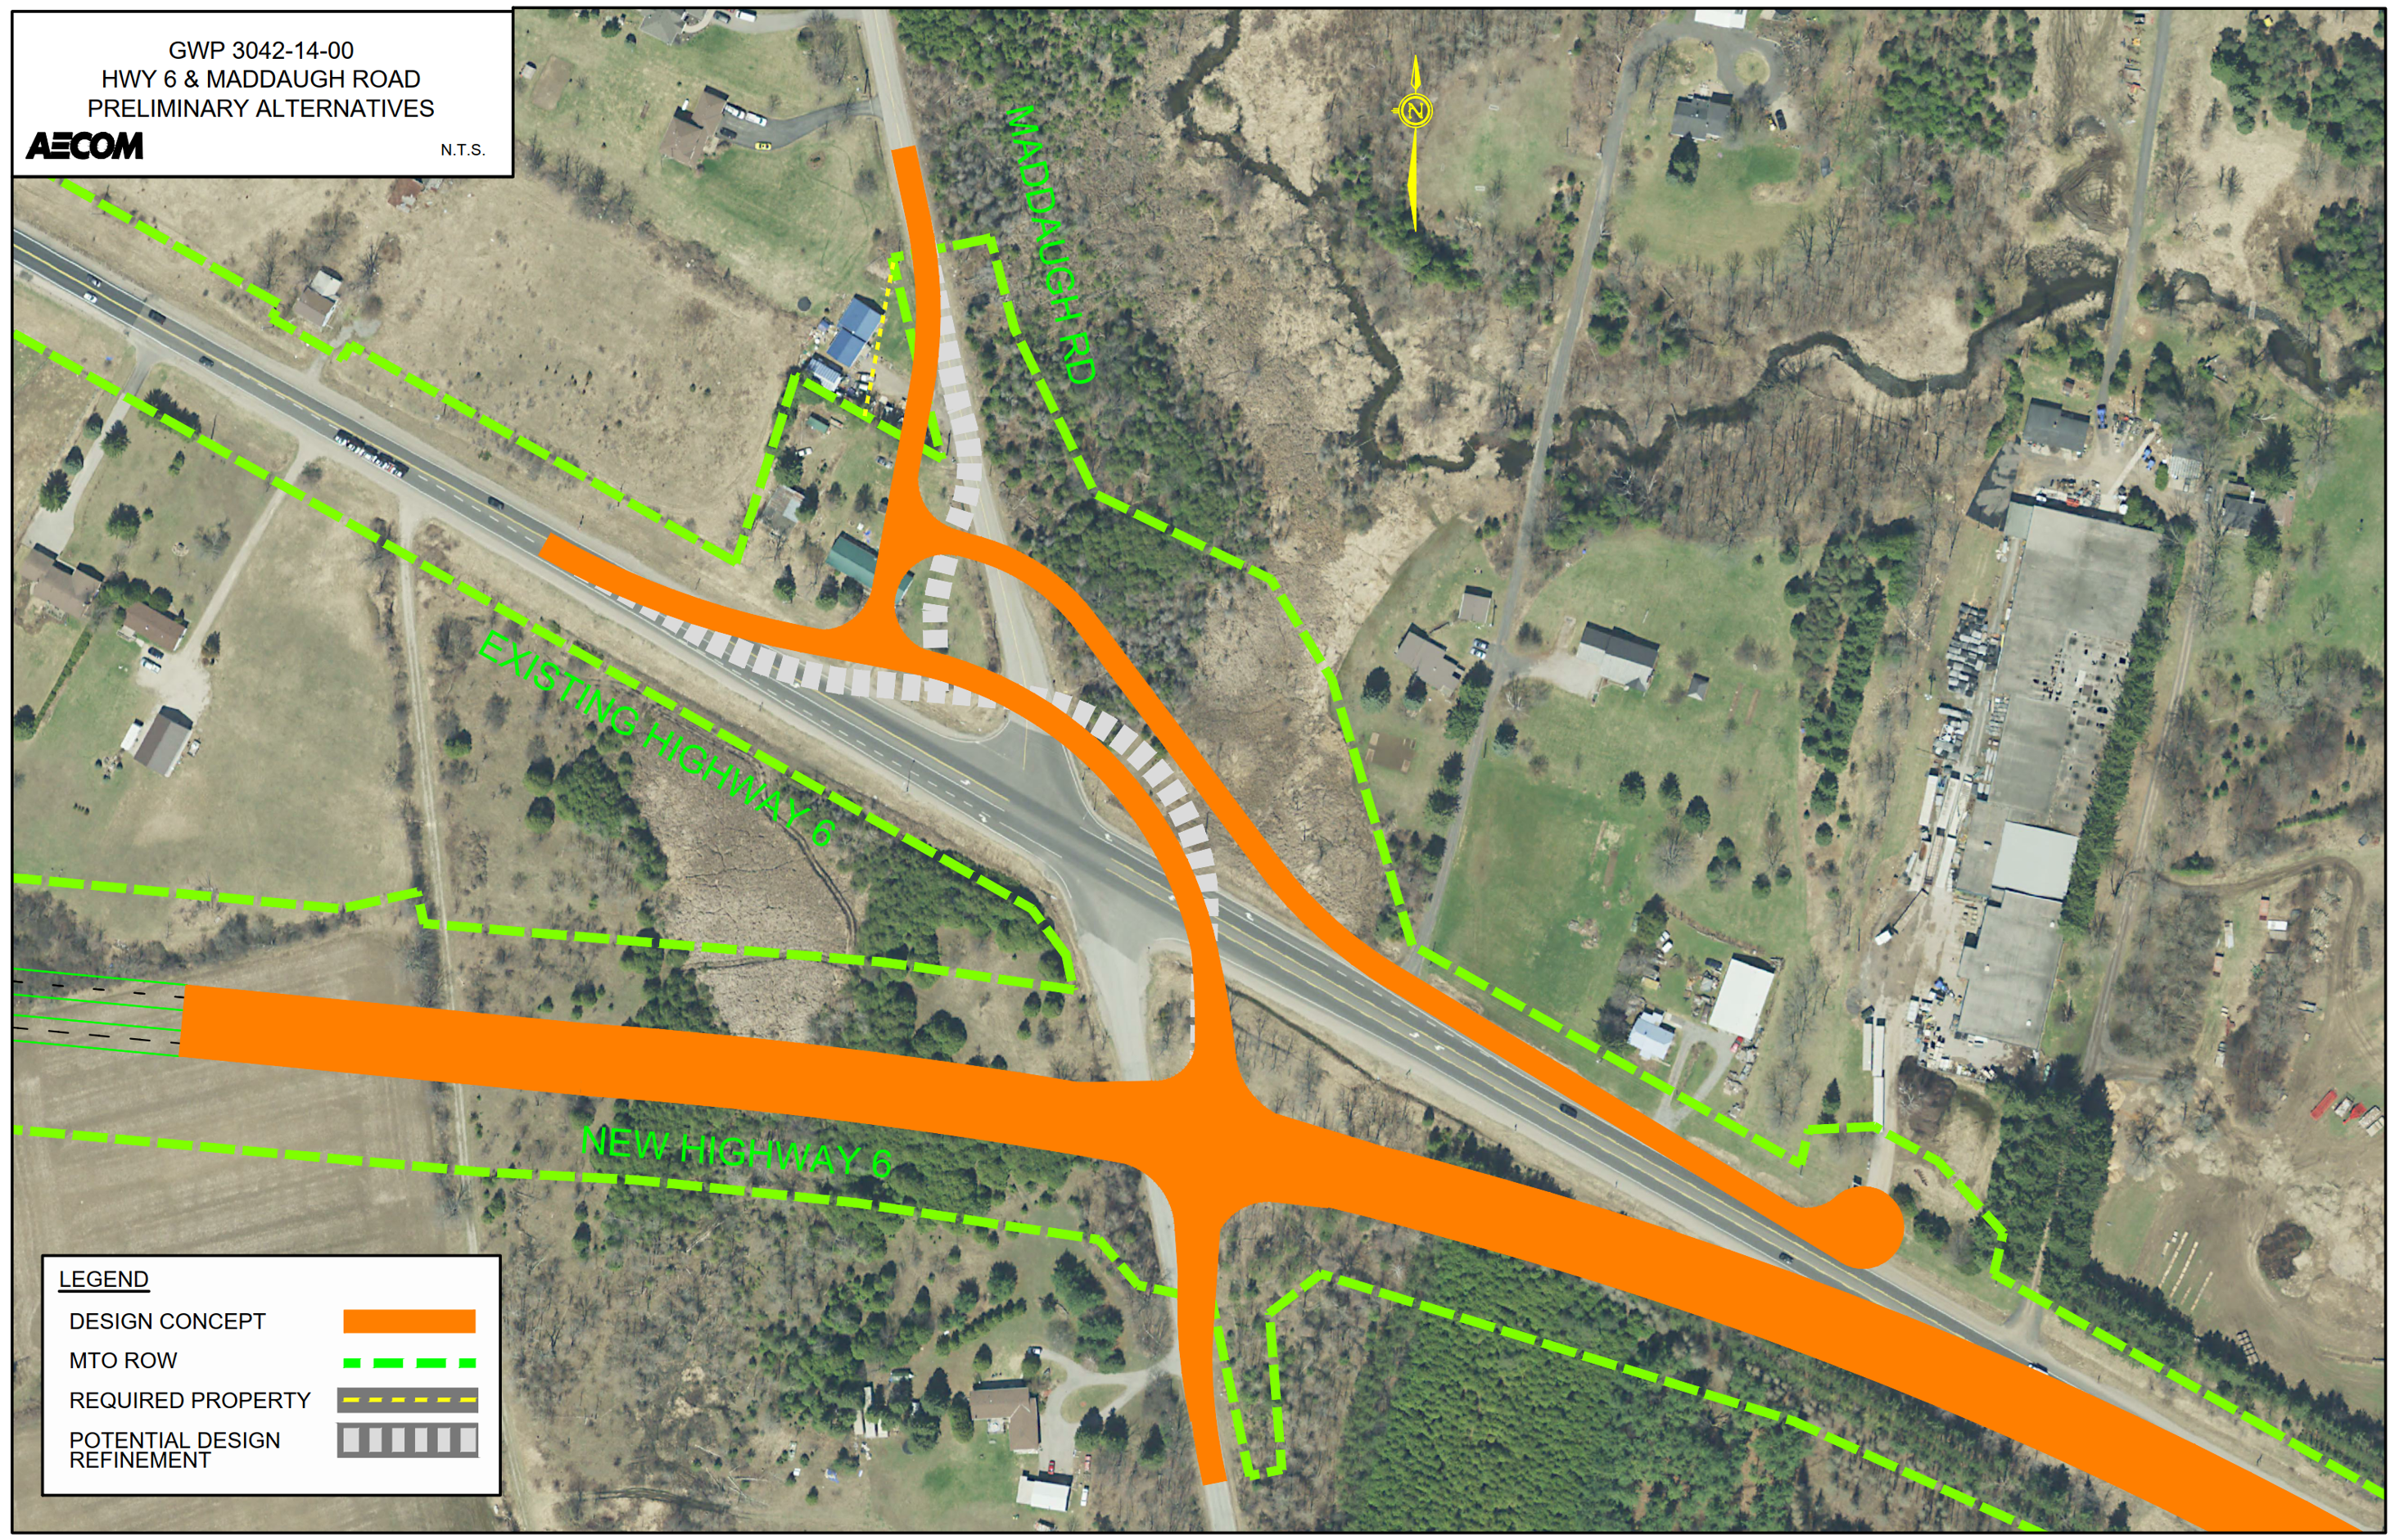 Aerial map displaying the refined design concept for Proposed Highway 6 and Maddaugh Road which shifts the intersection further to the northeast compared to the approved EA configuration.